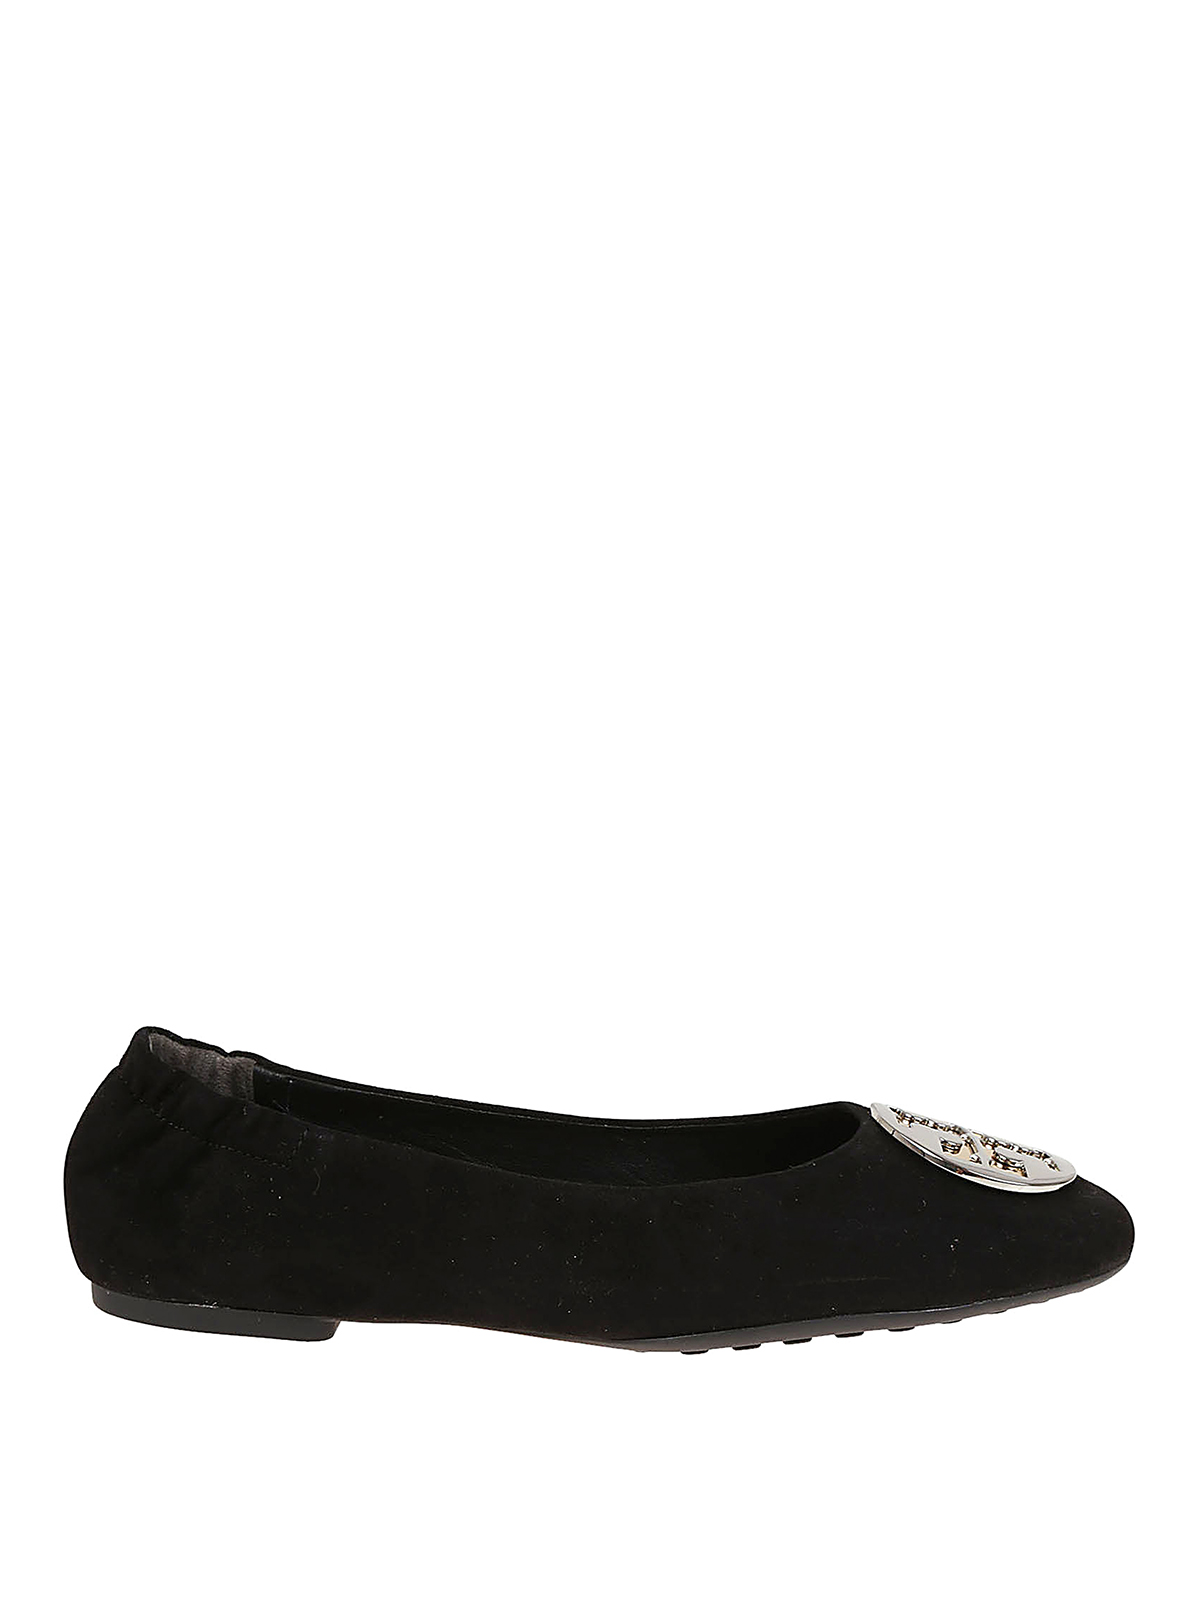 Tory Burch Claire Ballet In Black